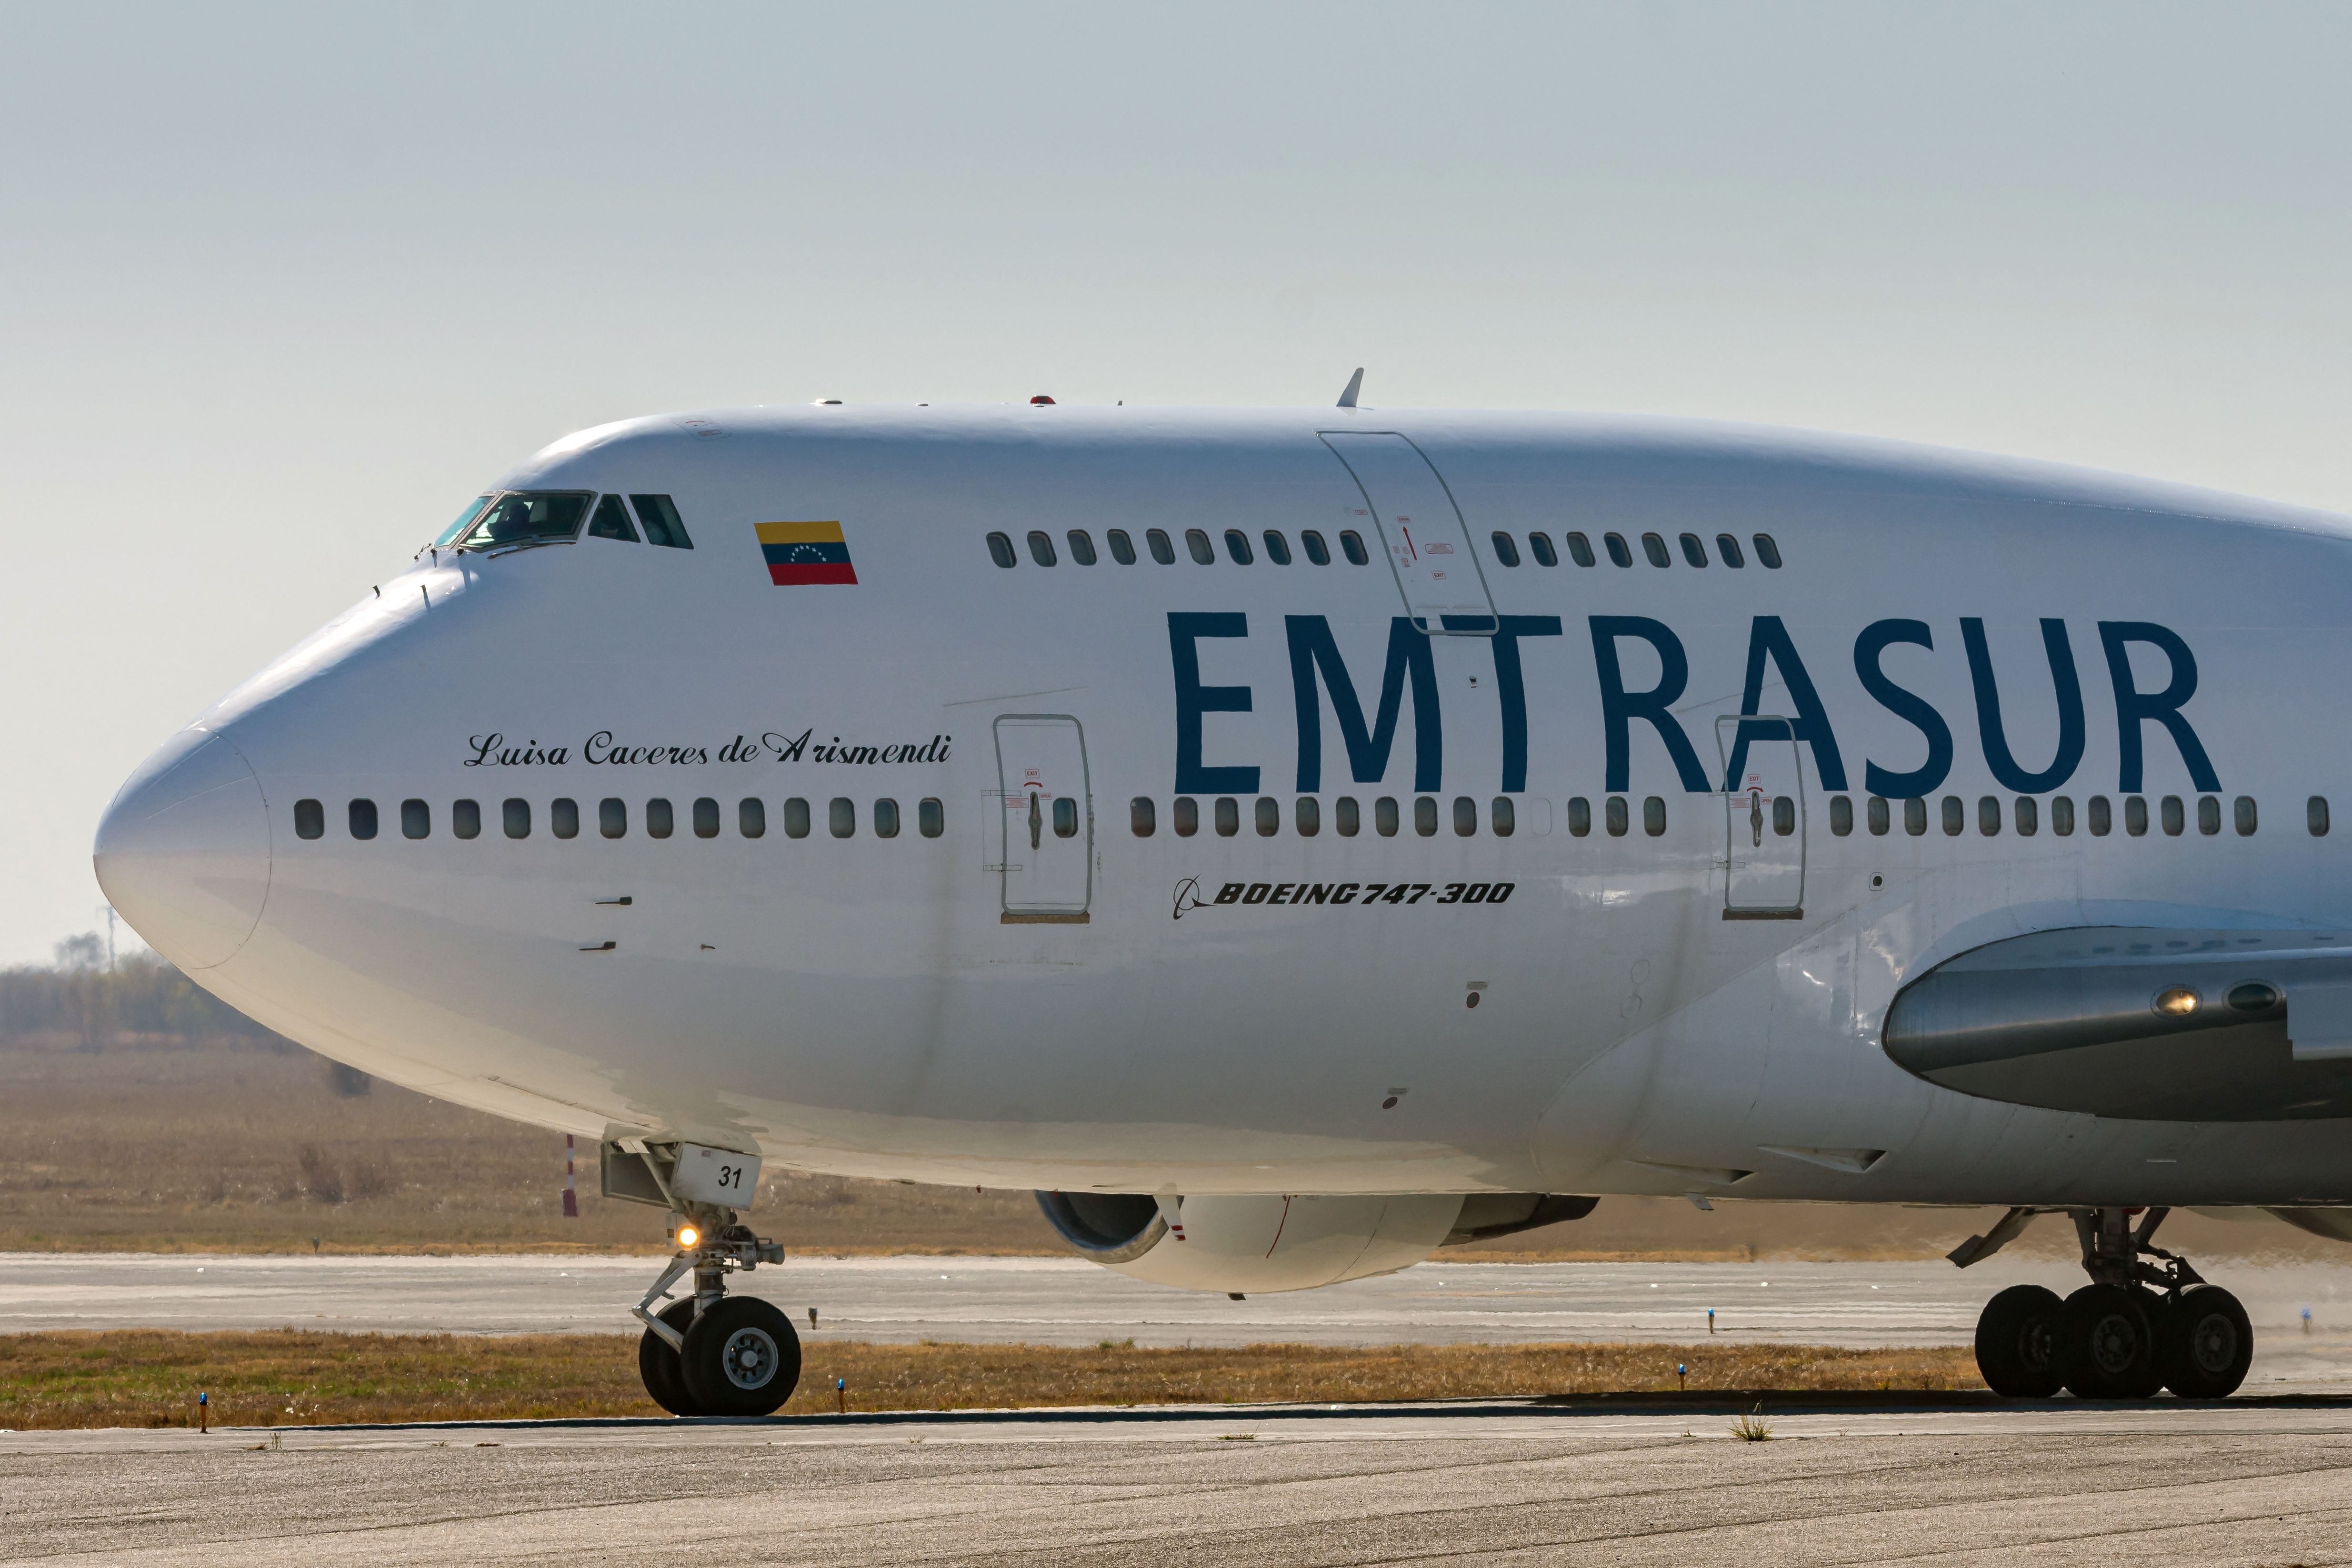 View of the Boeing 747-300 registrered number YV3531 of Venezuelan Emtrasur cargo airline at the international airport in Cordoba, Argentina, on June 6, 2022, before taking off for Buenos Aires.